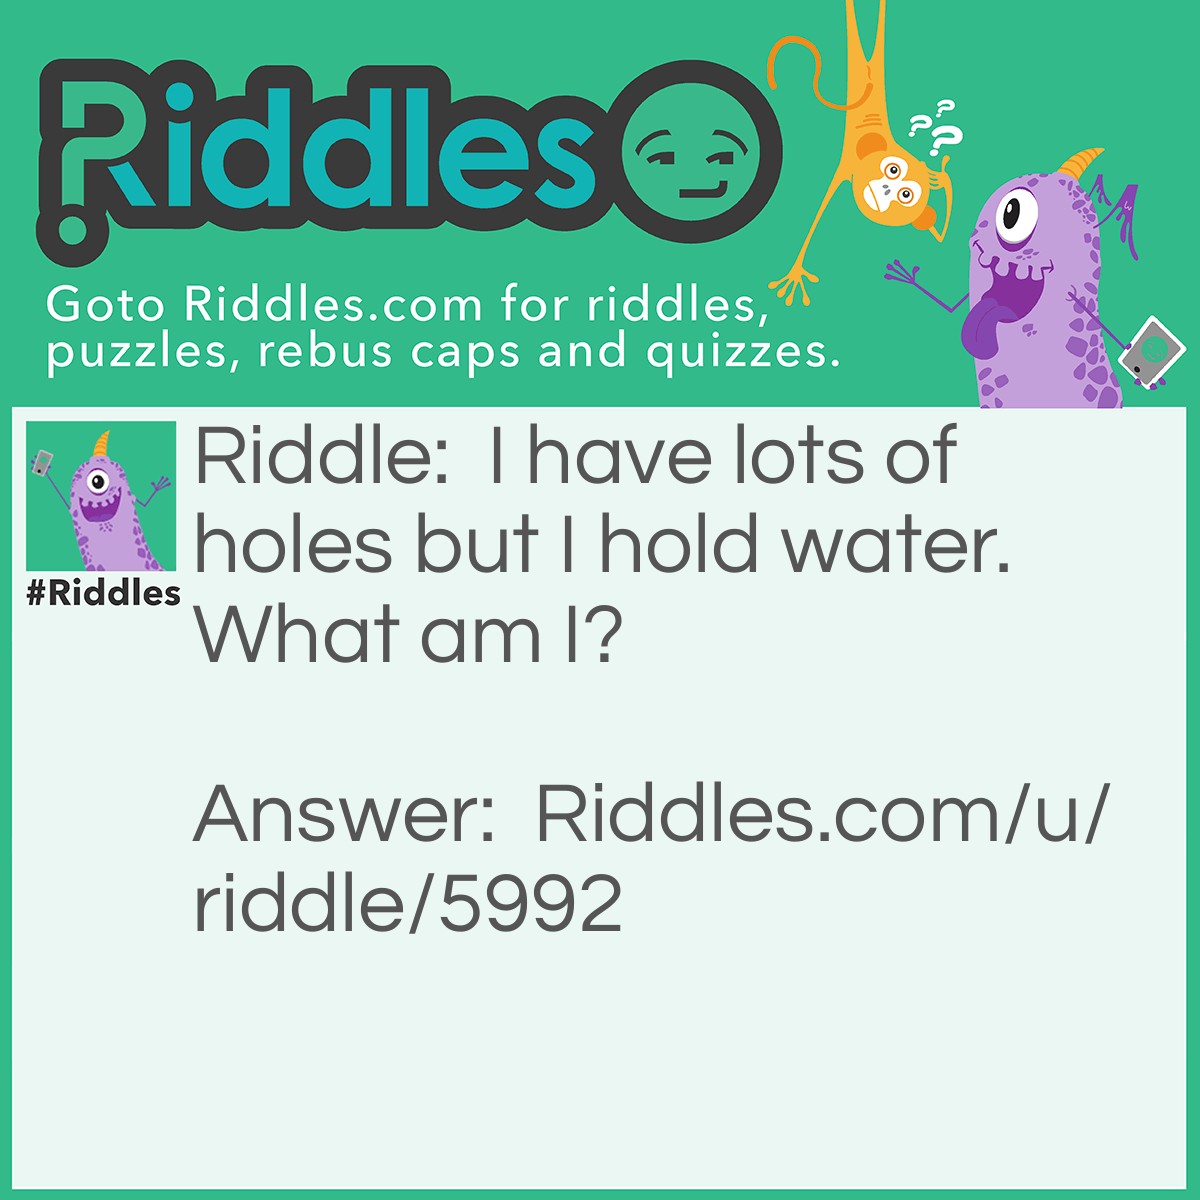 Riddle: I have lots of holes but I hold water. What am I? Answer: A sponge.